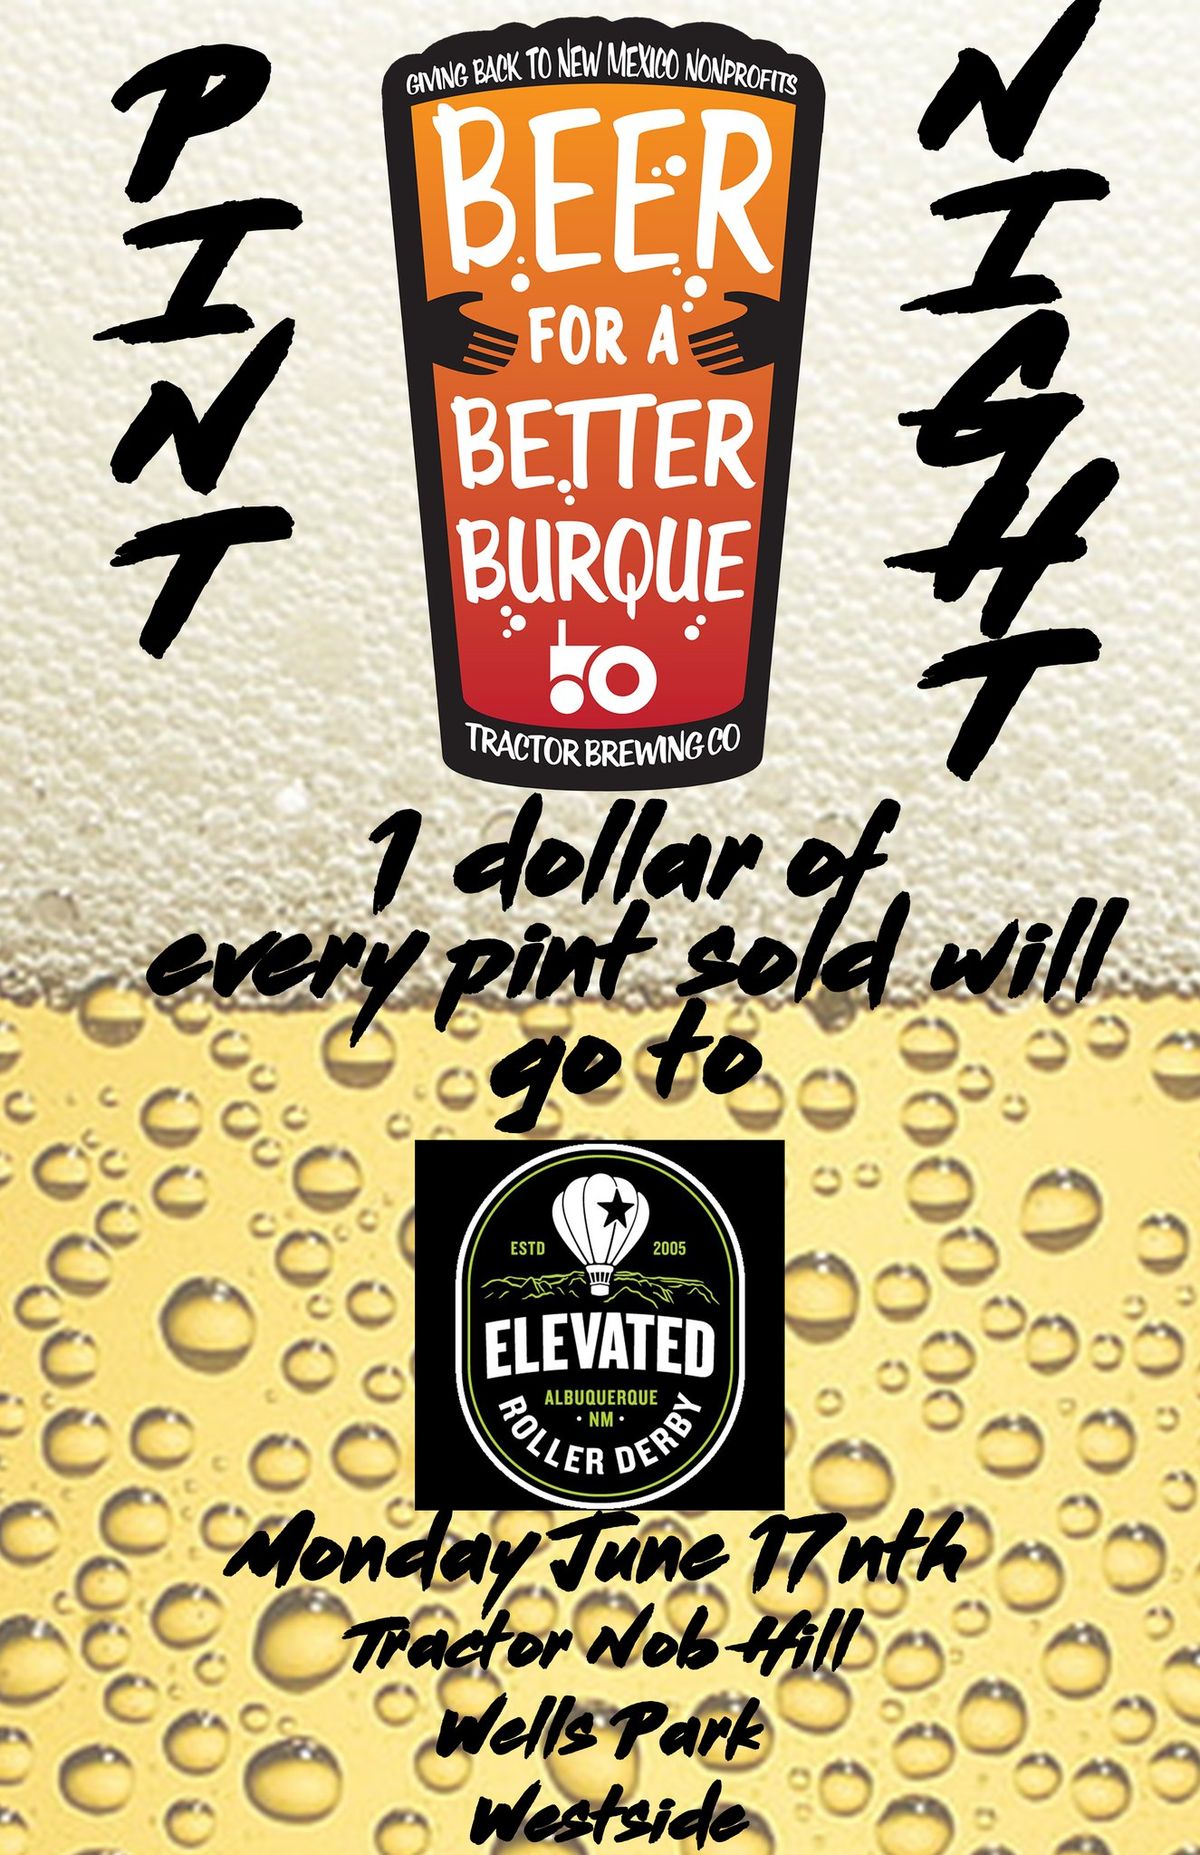 BBB Pint Night in Support of Elevated Roller Derby